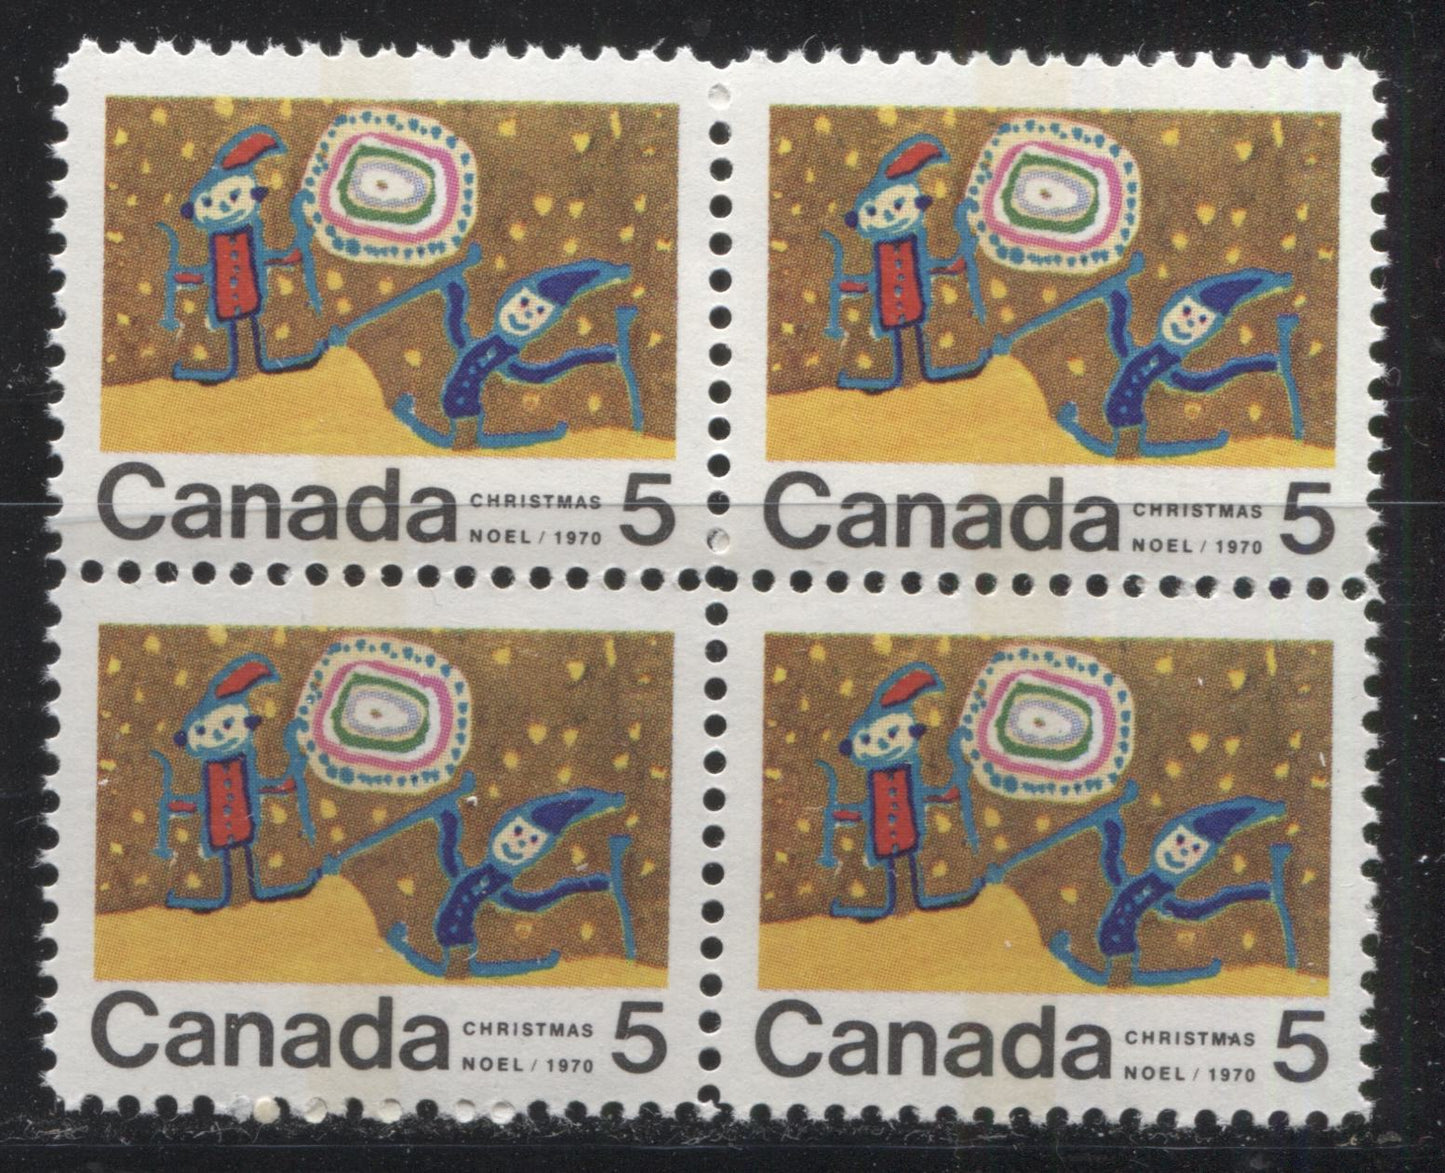 Lot 129 Canada #522pii 5c Multicoloured Children Skiing, 1970 Christmas Issue, a VFNH Winnipeg Tagged Centre Block of 4 on HB11 Ribbed Paper, With Dot Between "MA" of "Christmas" on LR Stamp, Perf. 11.9 x 11.95